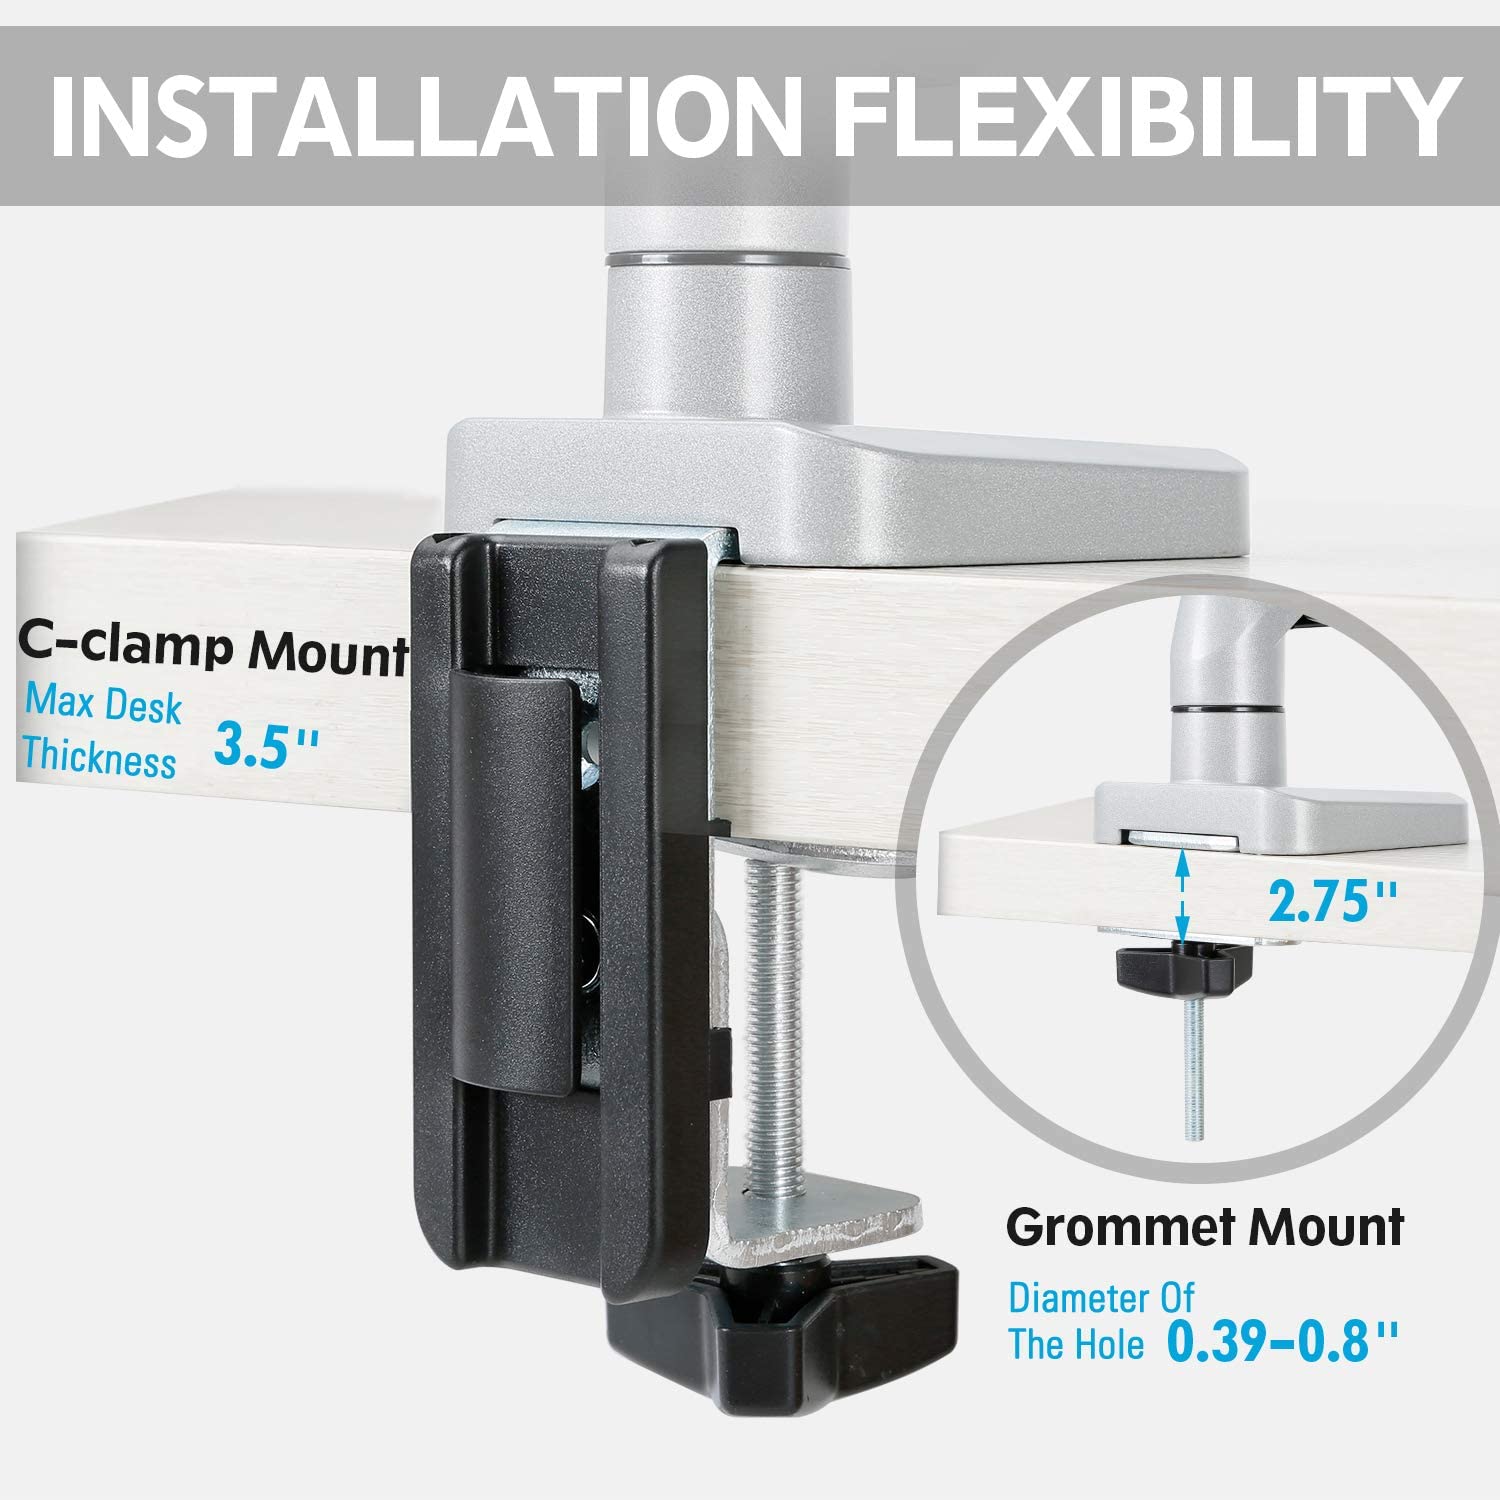 Single Monitor C-clamp Mount and Grommet Mount